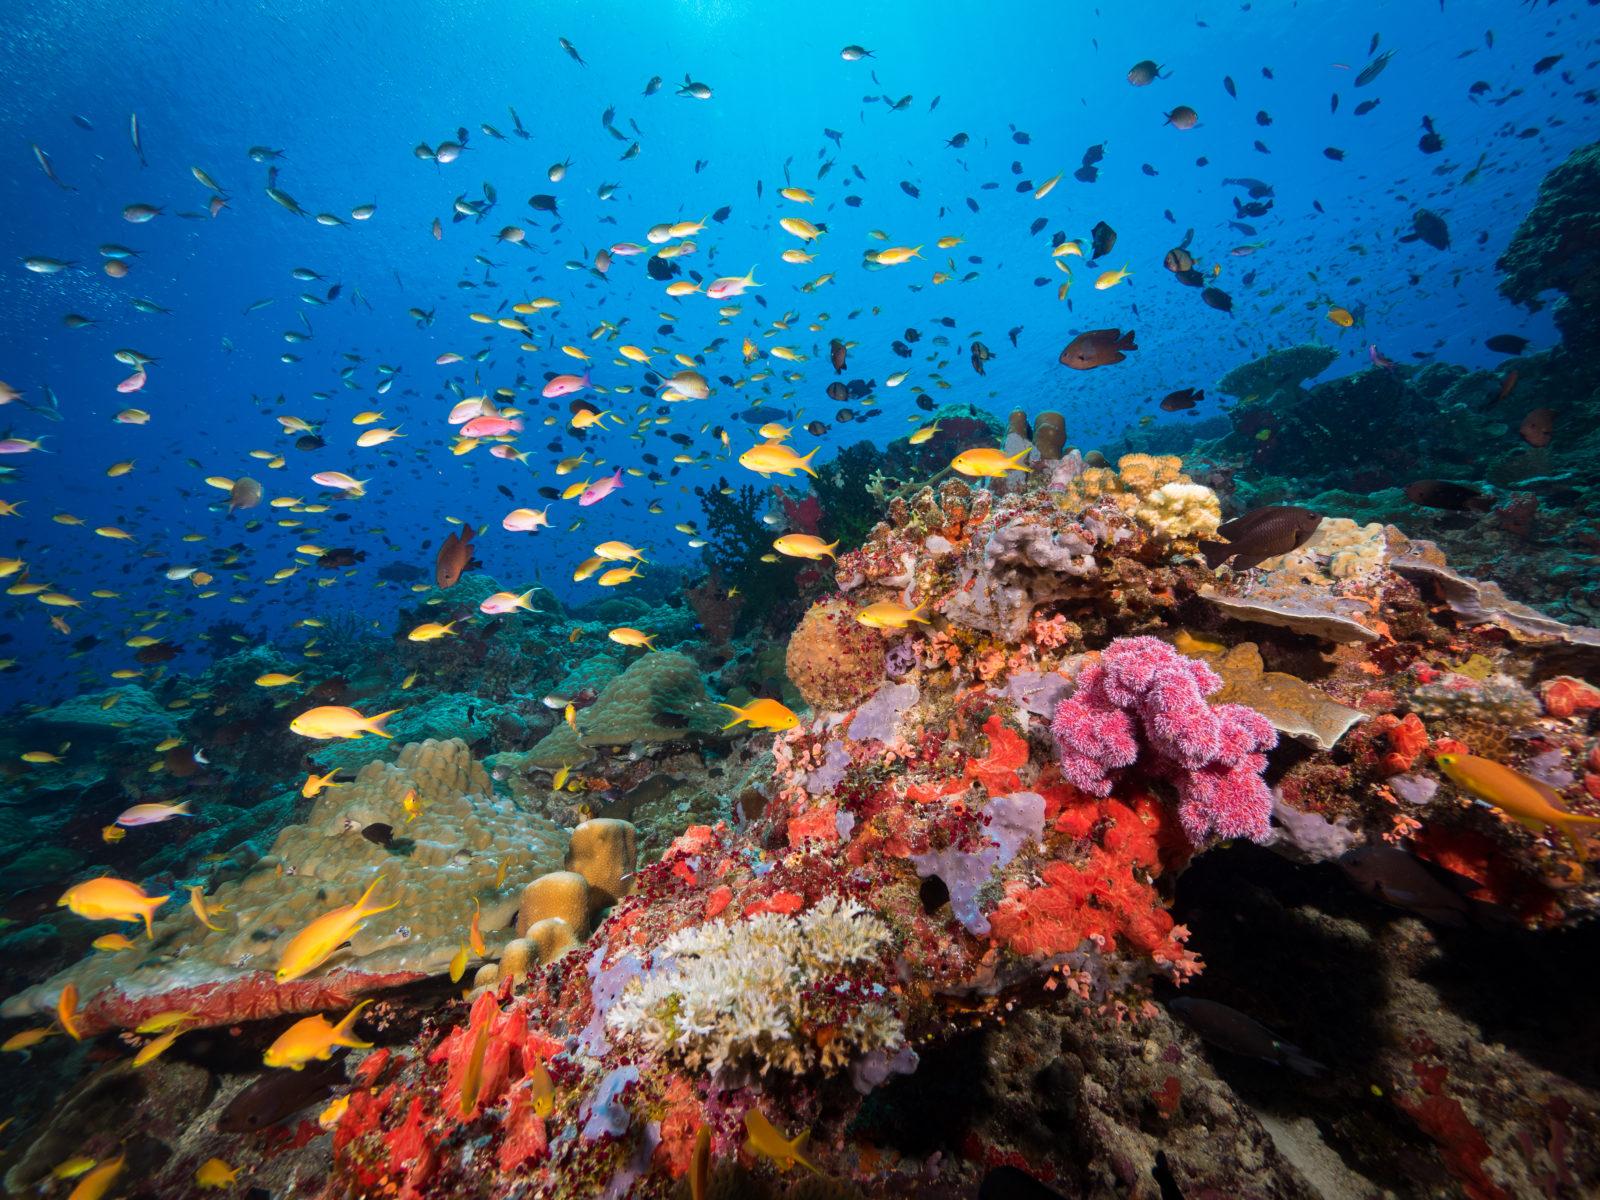 12 Great Reasons To Add PNG To Your Bucket List | Scuba Diver Mag